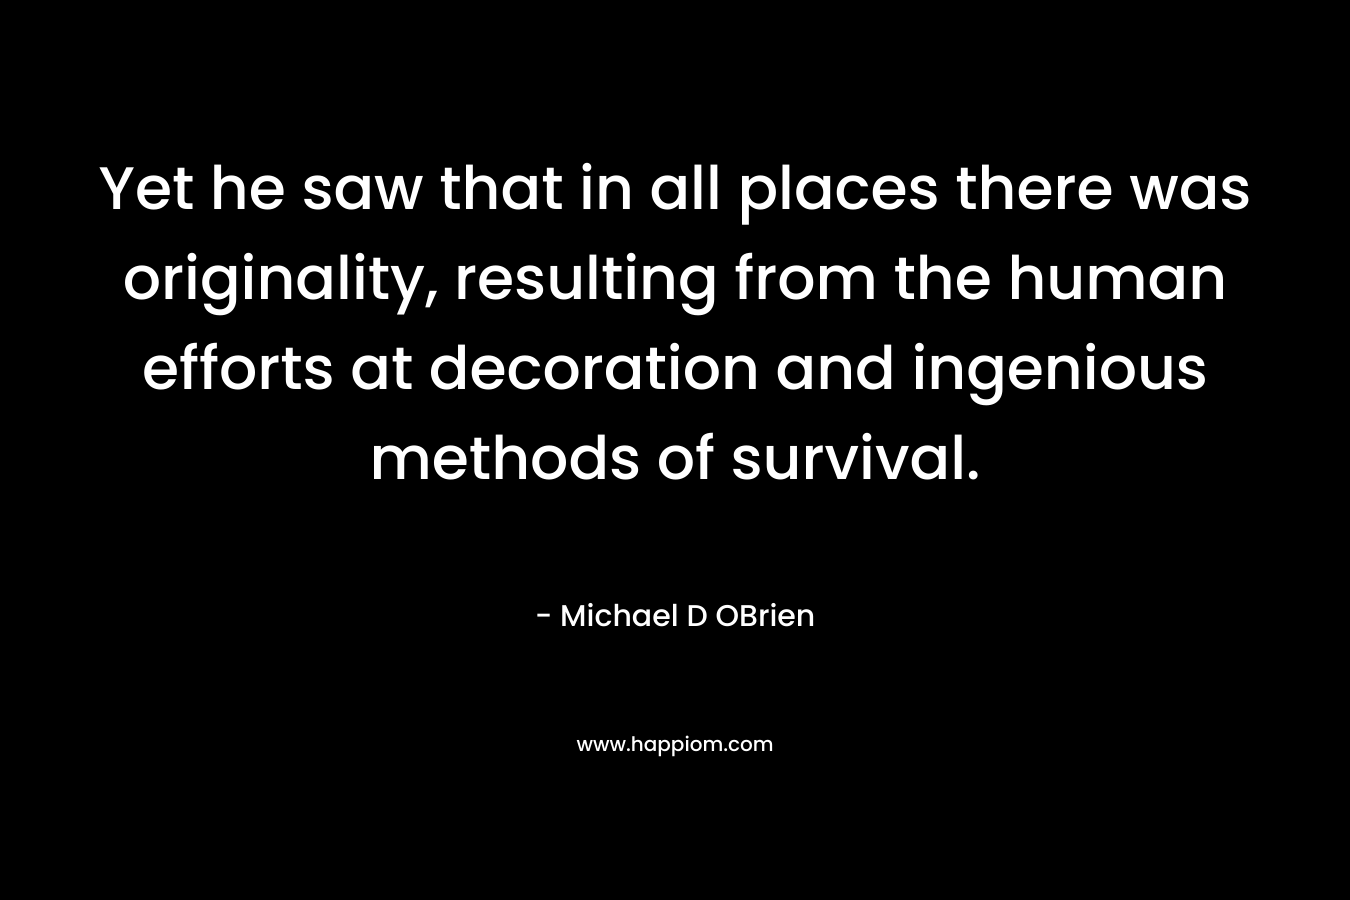 Yet he saw that in all places there was originality, resulting from the human efforts at decoration and ingenious methods of survival. – Michael D OBrien